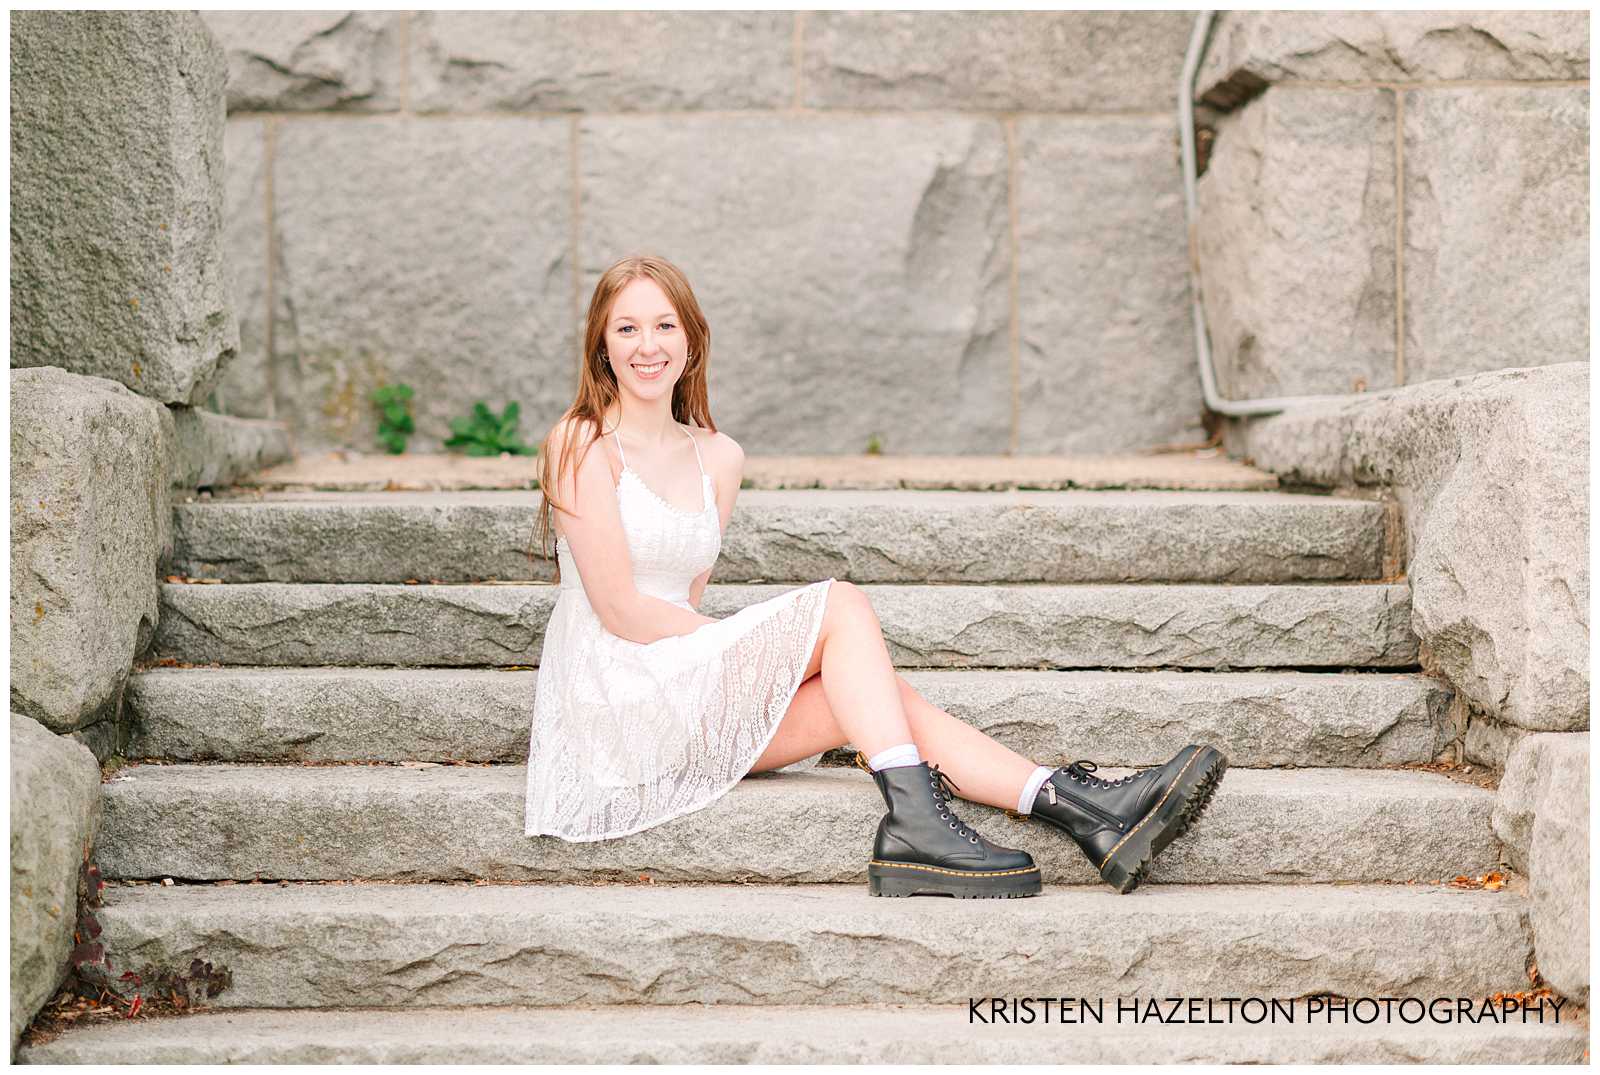 High school senior photos at Lincoln Park zoo in Chicago, IL; a girl in a white dress and Doc Marten boots seated on stone steps